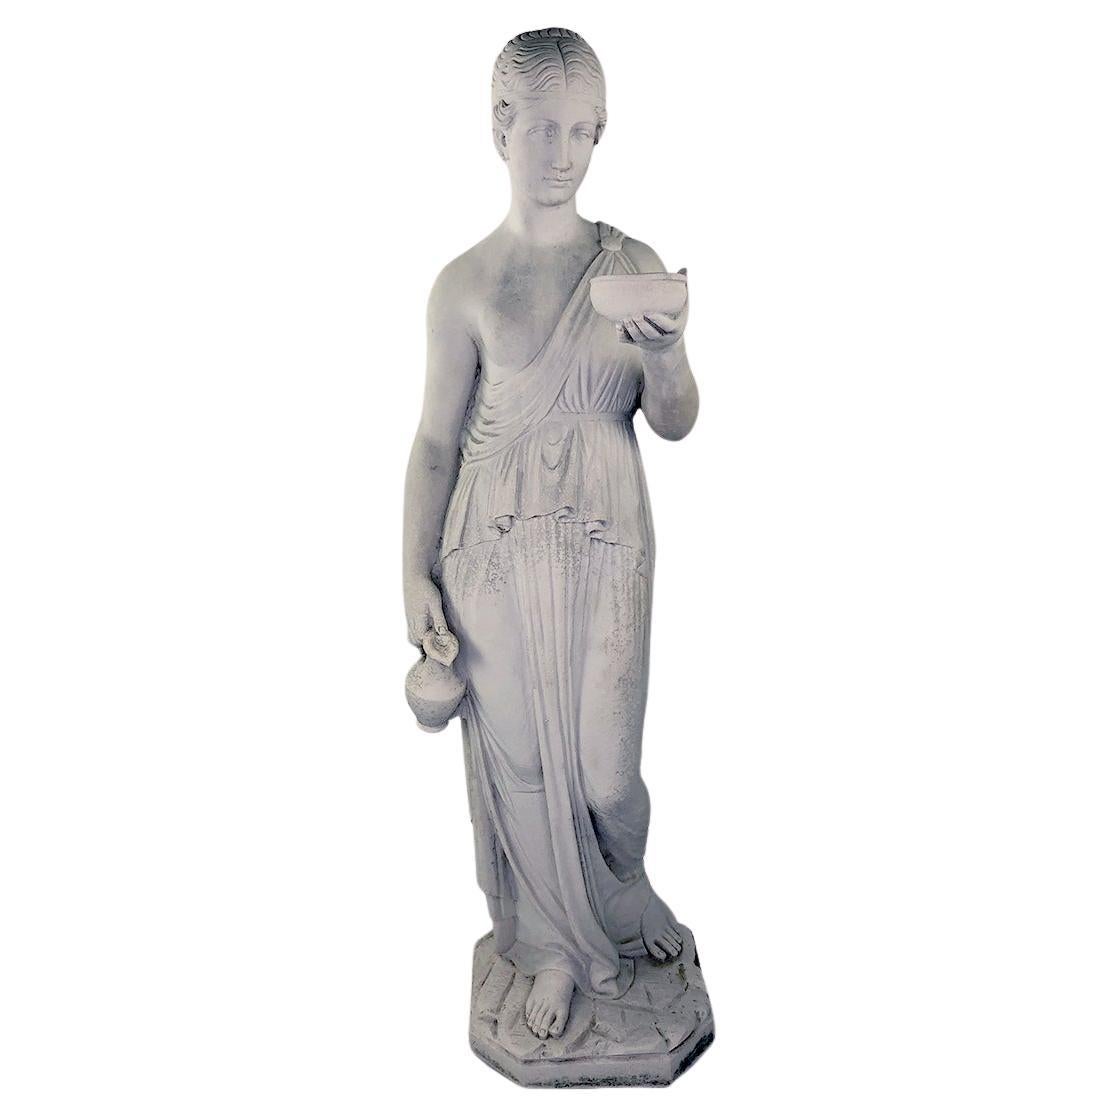 Vintage reproduction of an ancient Greco-Roman style statue For Sale